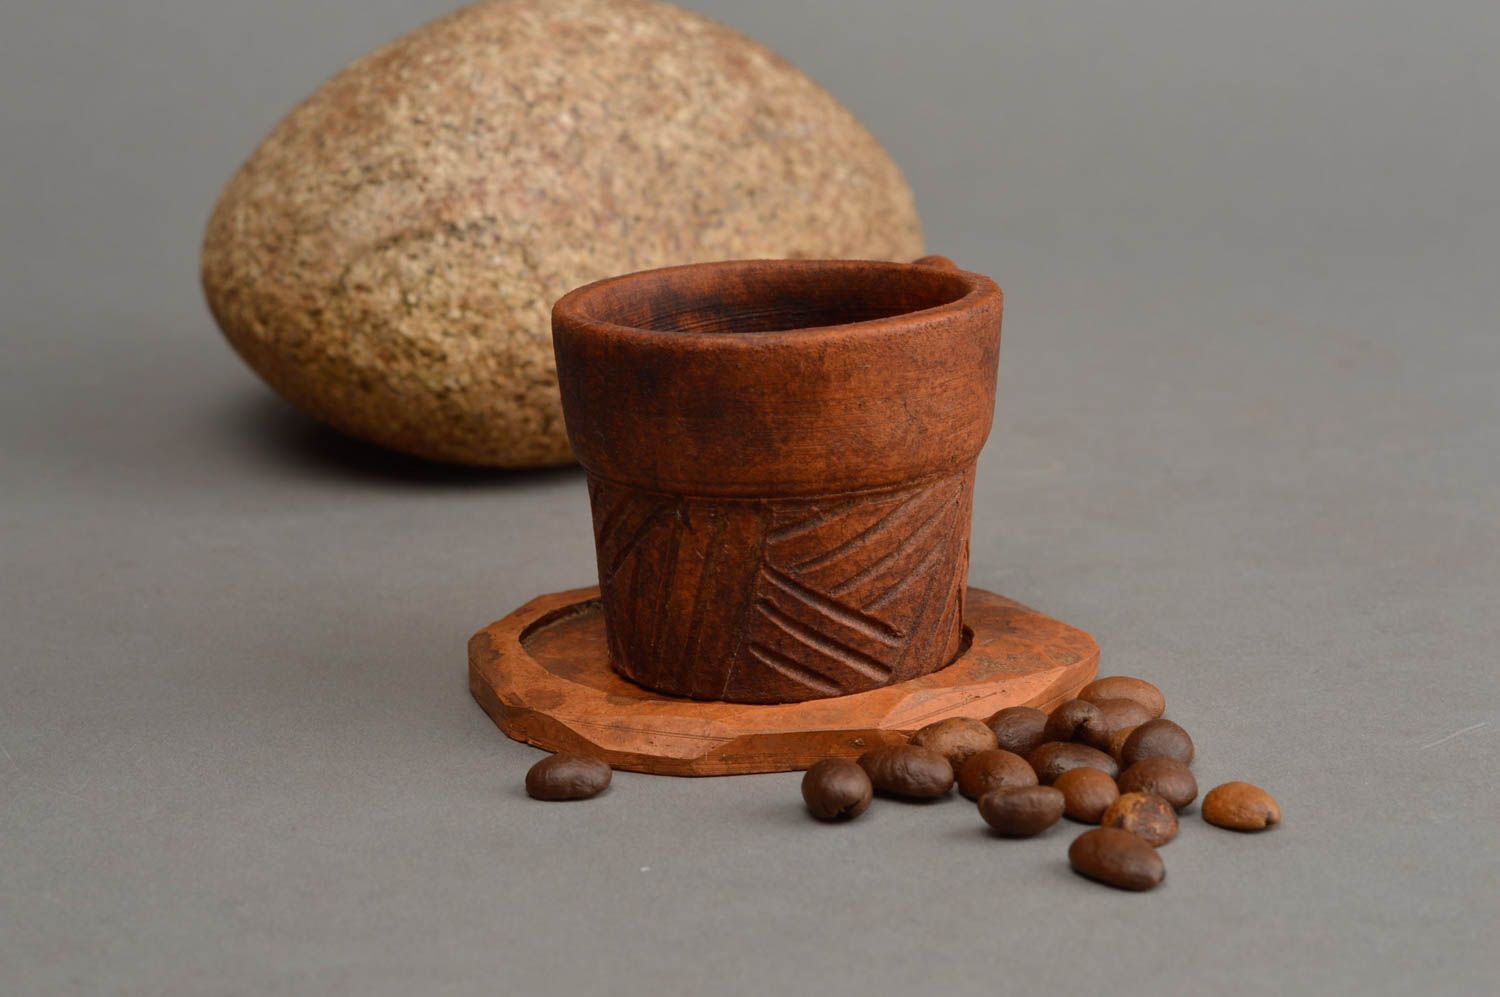 Art clay nonglazed espresso coffee cup with handle, saucer, and handle in the shape of the stick photo 1